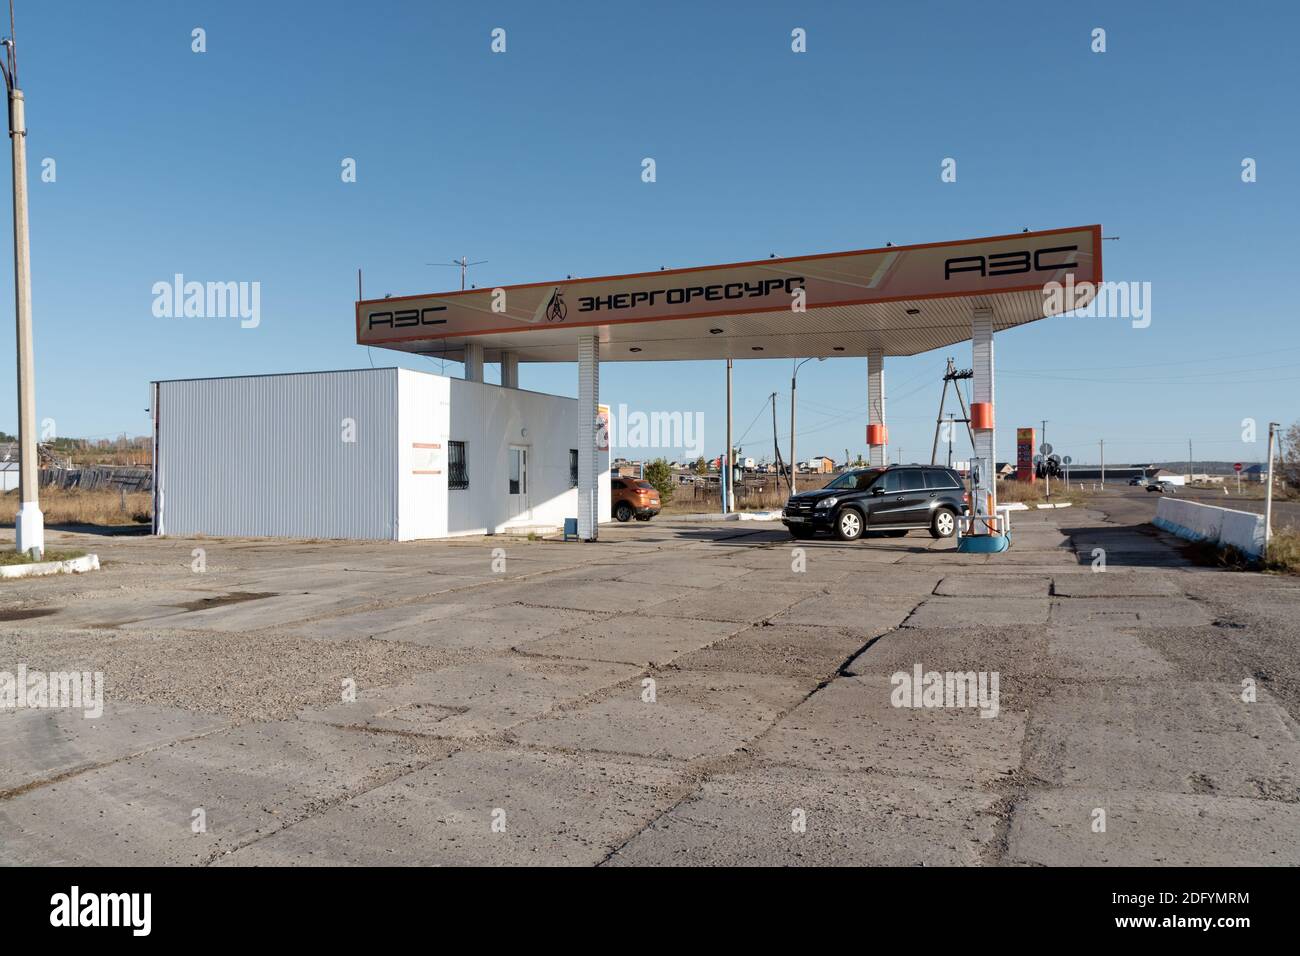 A car stands near a small roadside gas station with the name - Power resource, on a sunny autumn day. Stock Photo